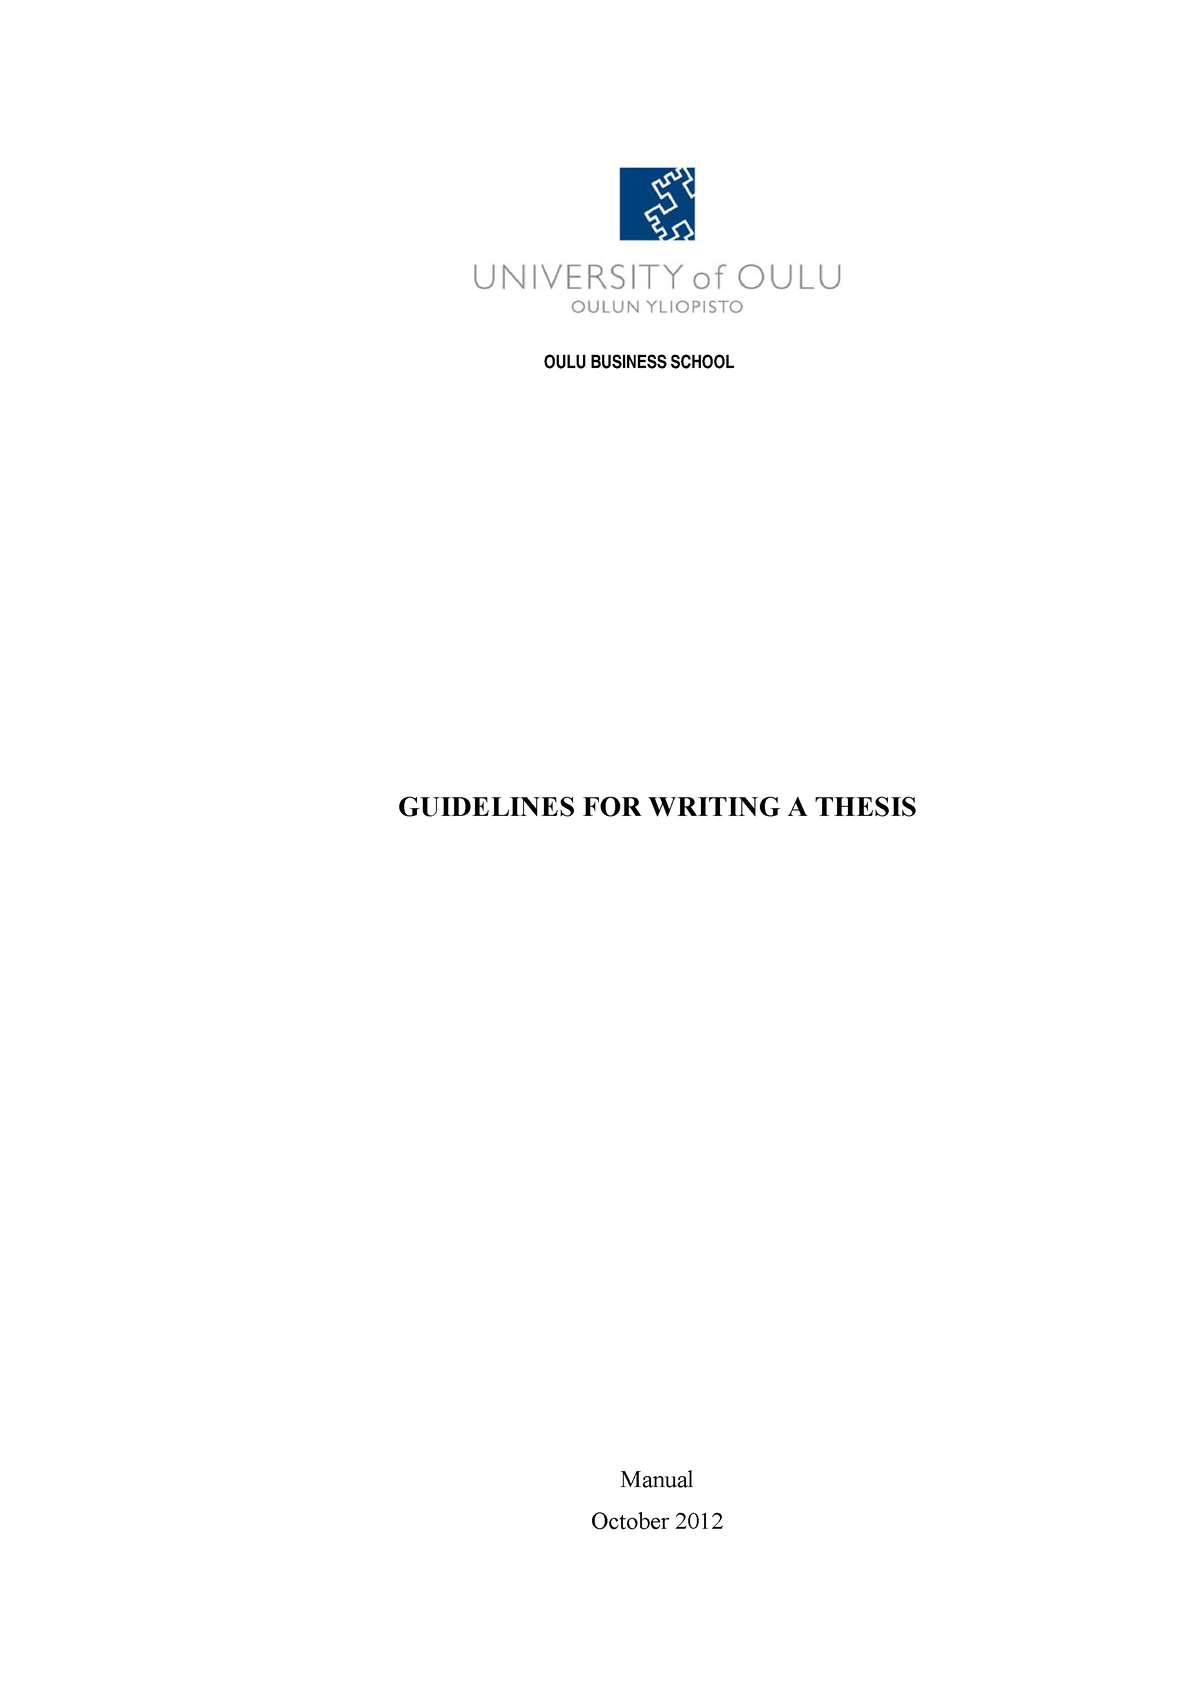 guidelines-for-writing-a-theses-oulu-business-school-guidelines-for-writing-a-thesis-manual